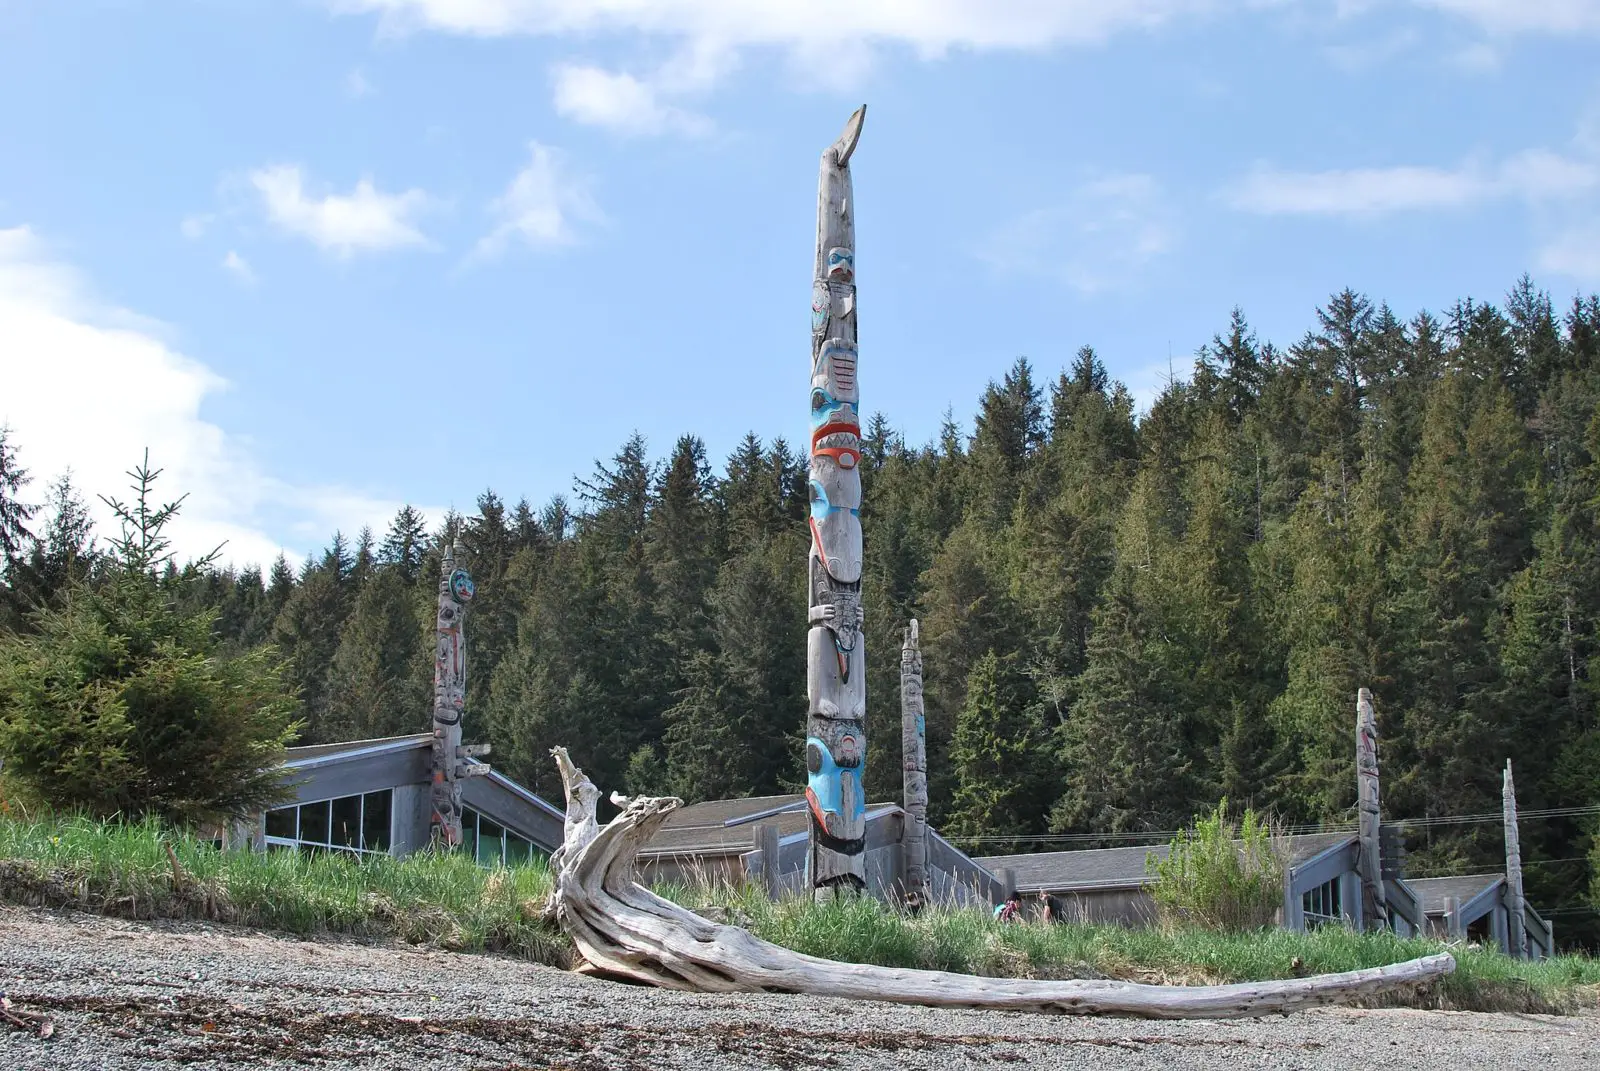 Totem poles in front of the Haida Heritage Centre at Ḵay Llnagaay by Skidegate, Canada - Photo: Karen Neoh (CC)